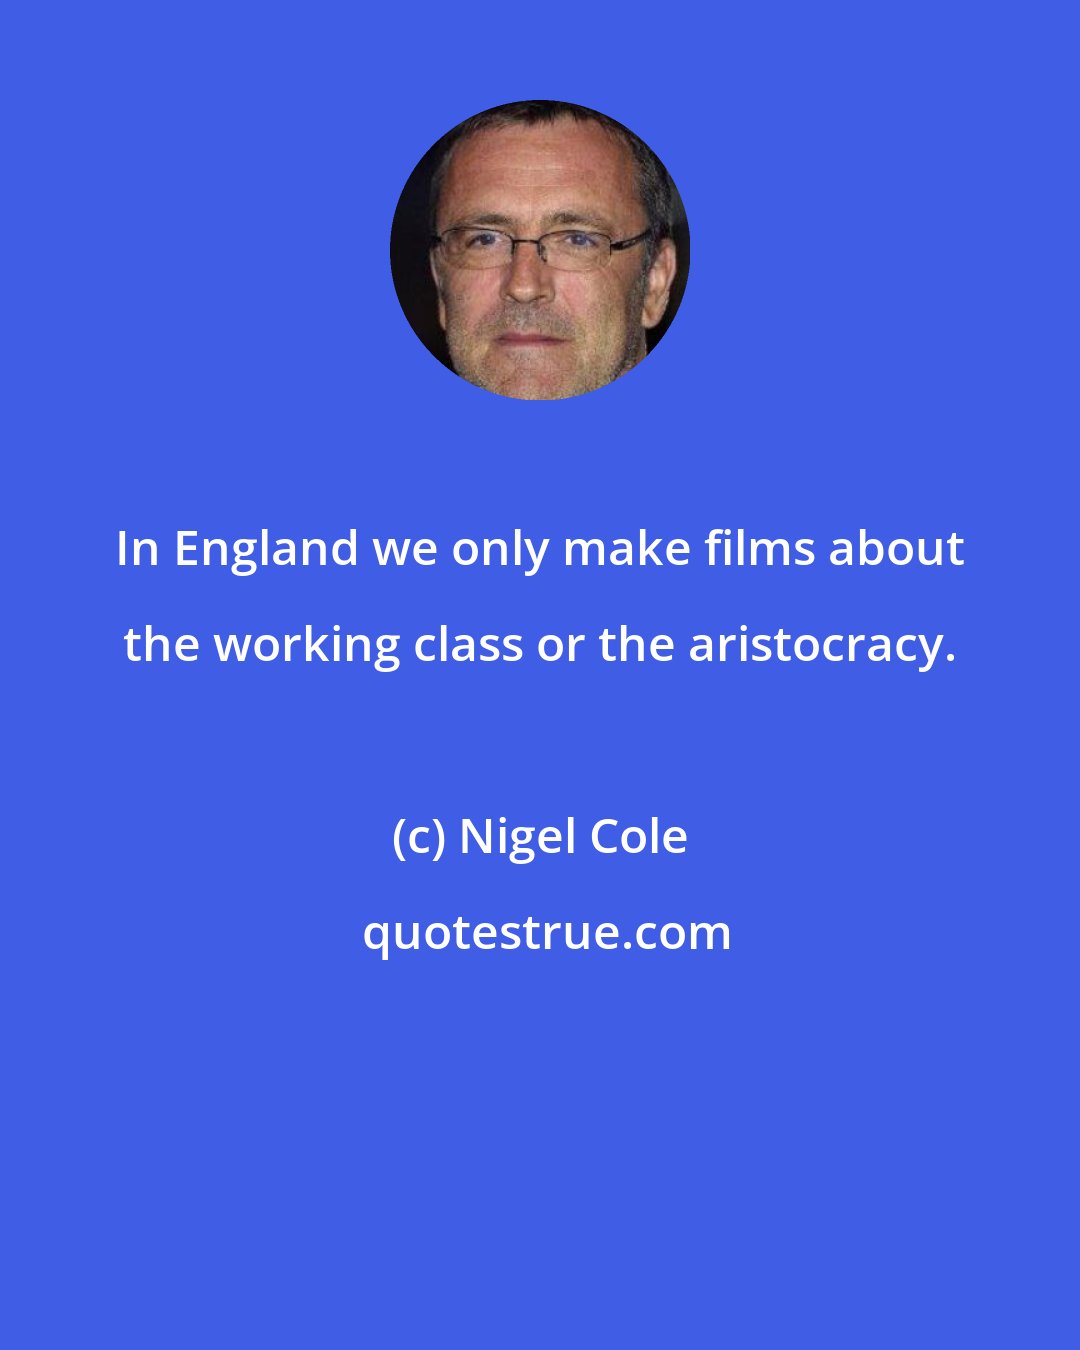 Nigel Cole: In England we only make films about the working class or the aristocracy.